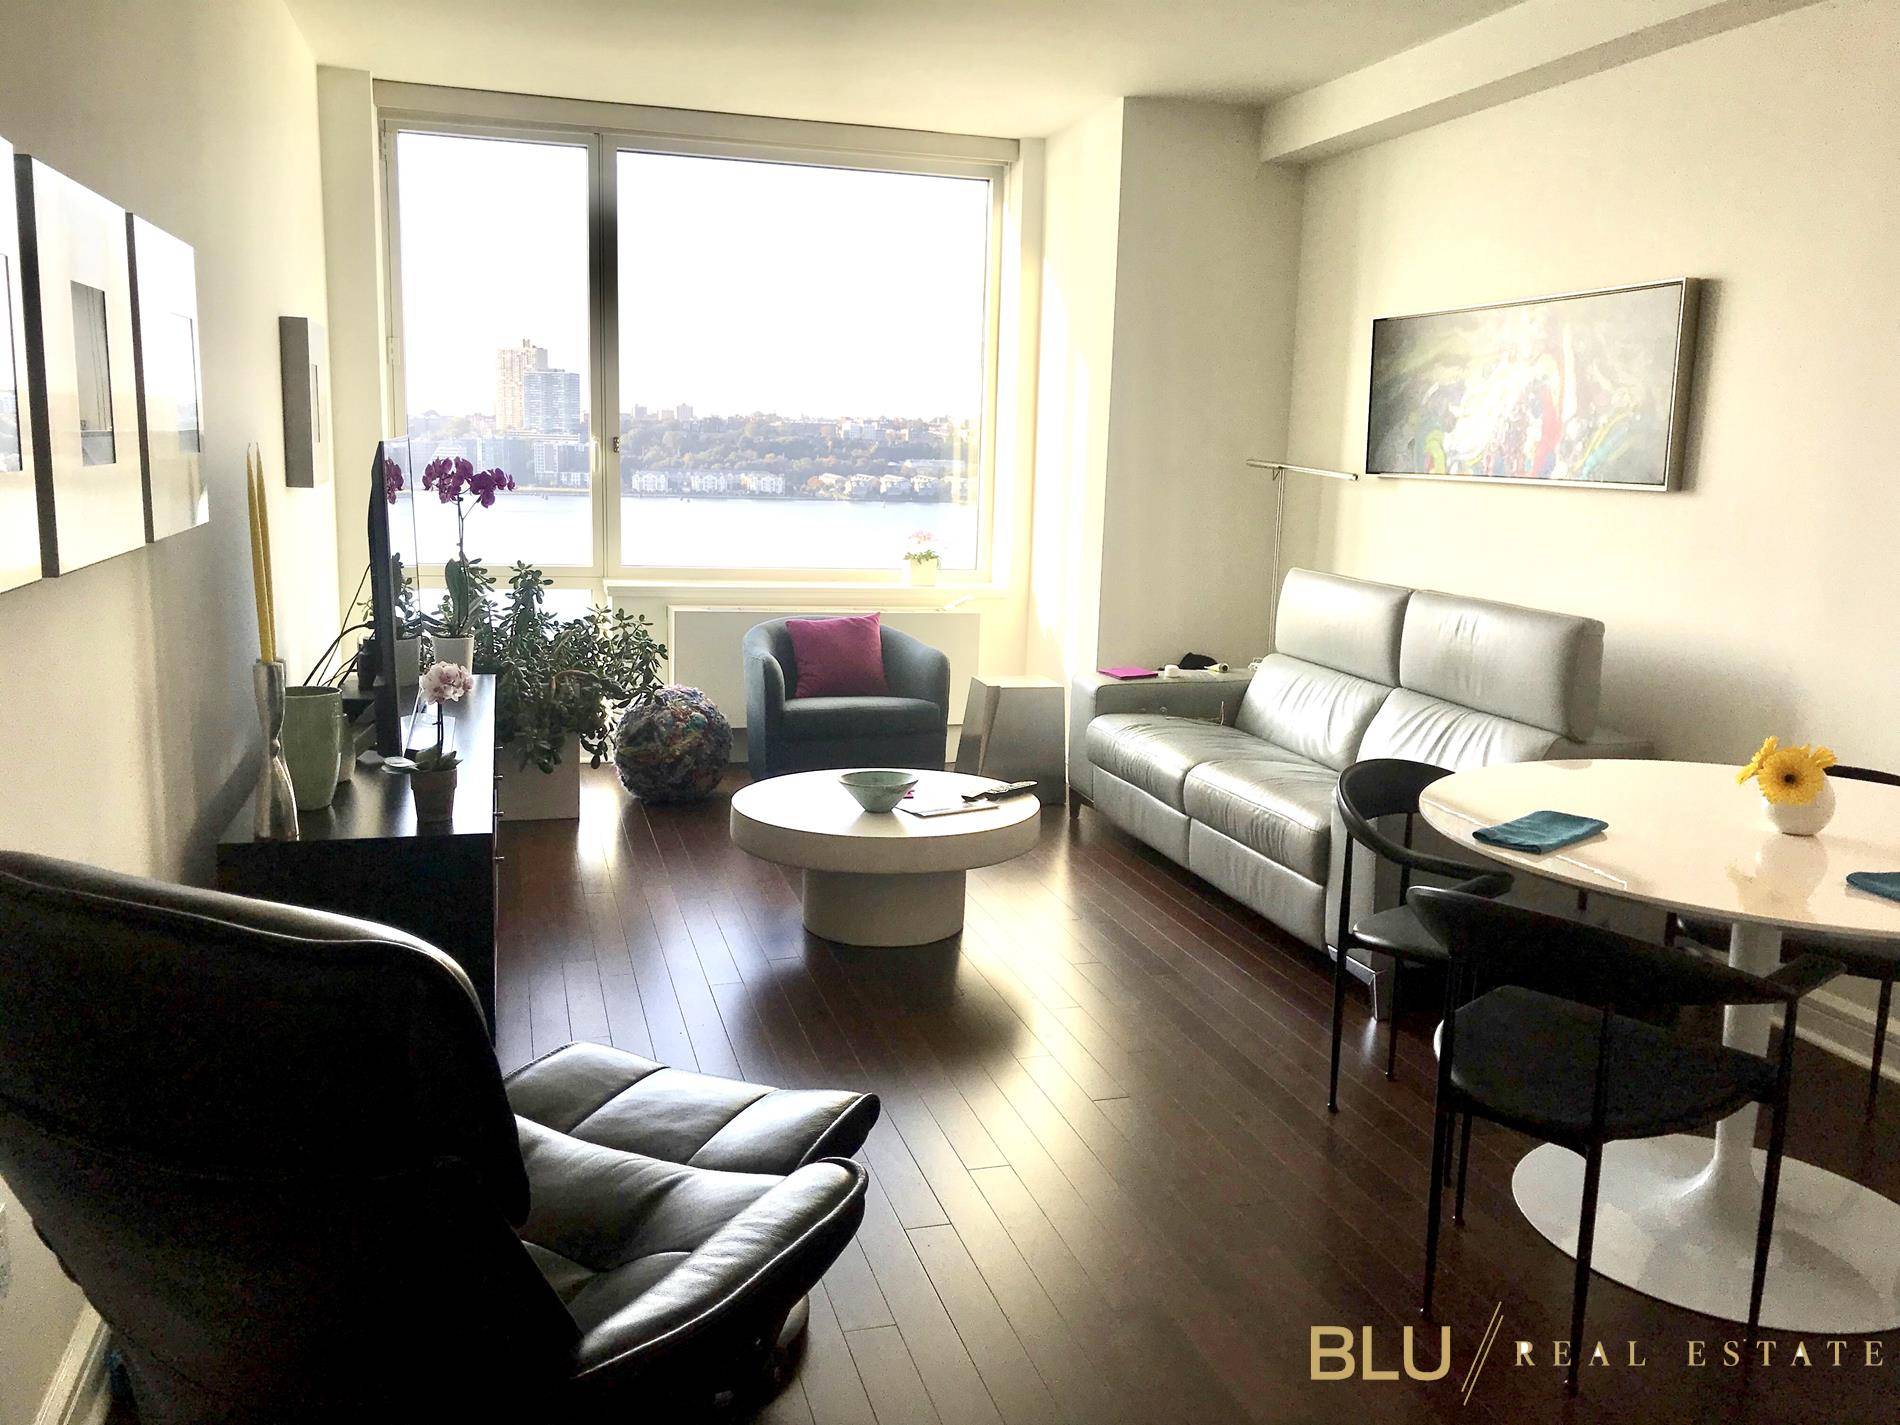 Enjoy luxury and Spectacular Views at The Avery, a full service white glove building featuring 24 hour doorman concierge The Avery is one of Riverside Blvd's stunning homes and one ...